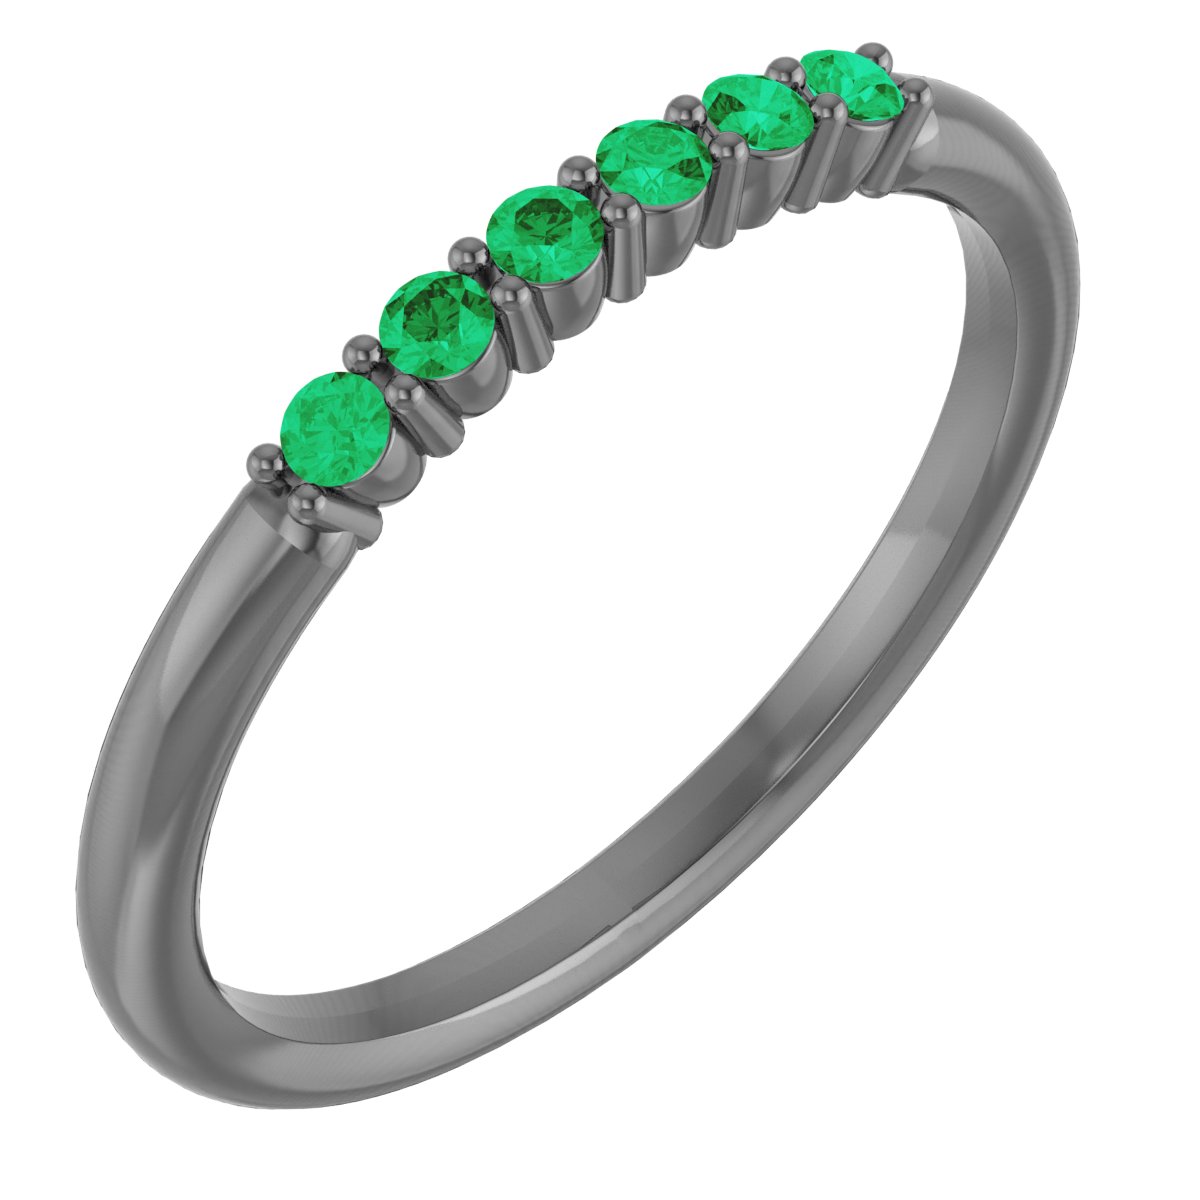 14K Yellow Natural Emerald Stackable Ring